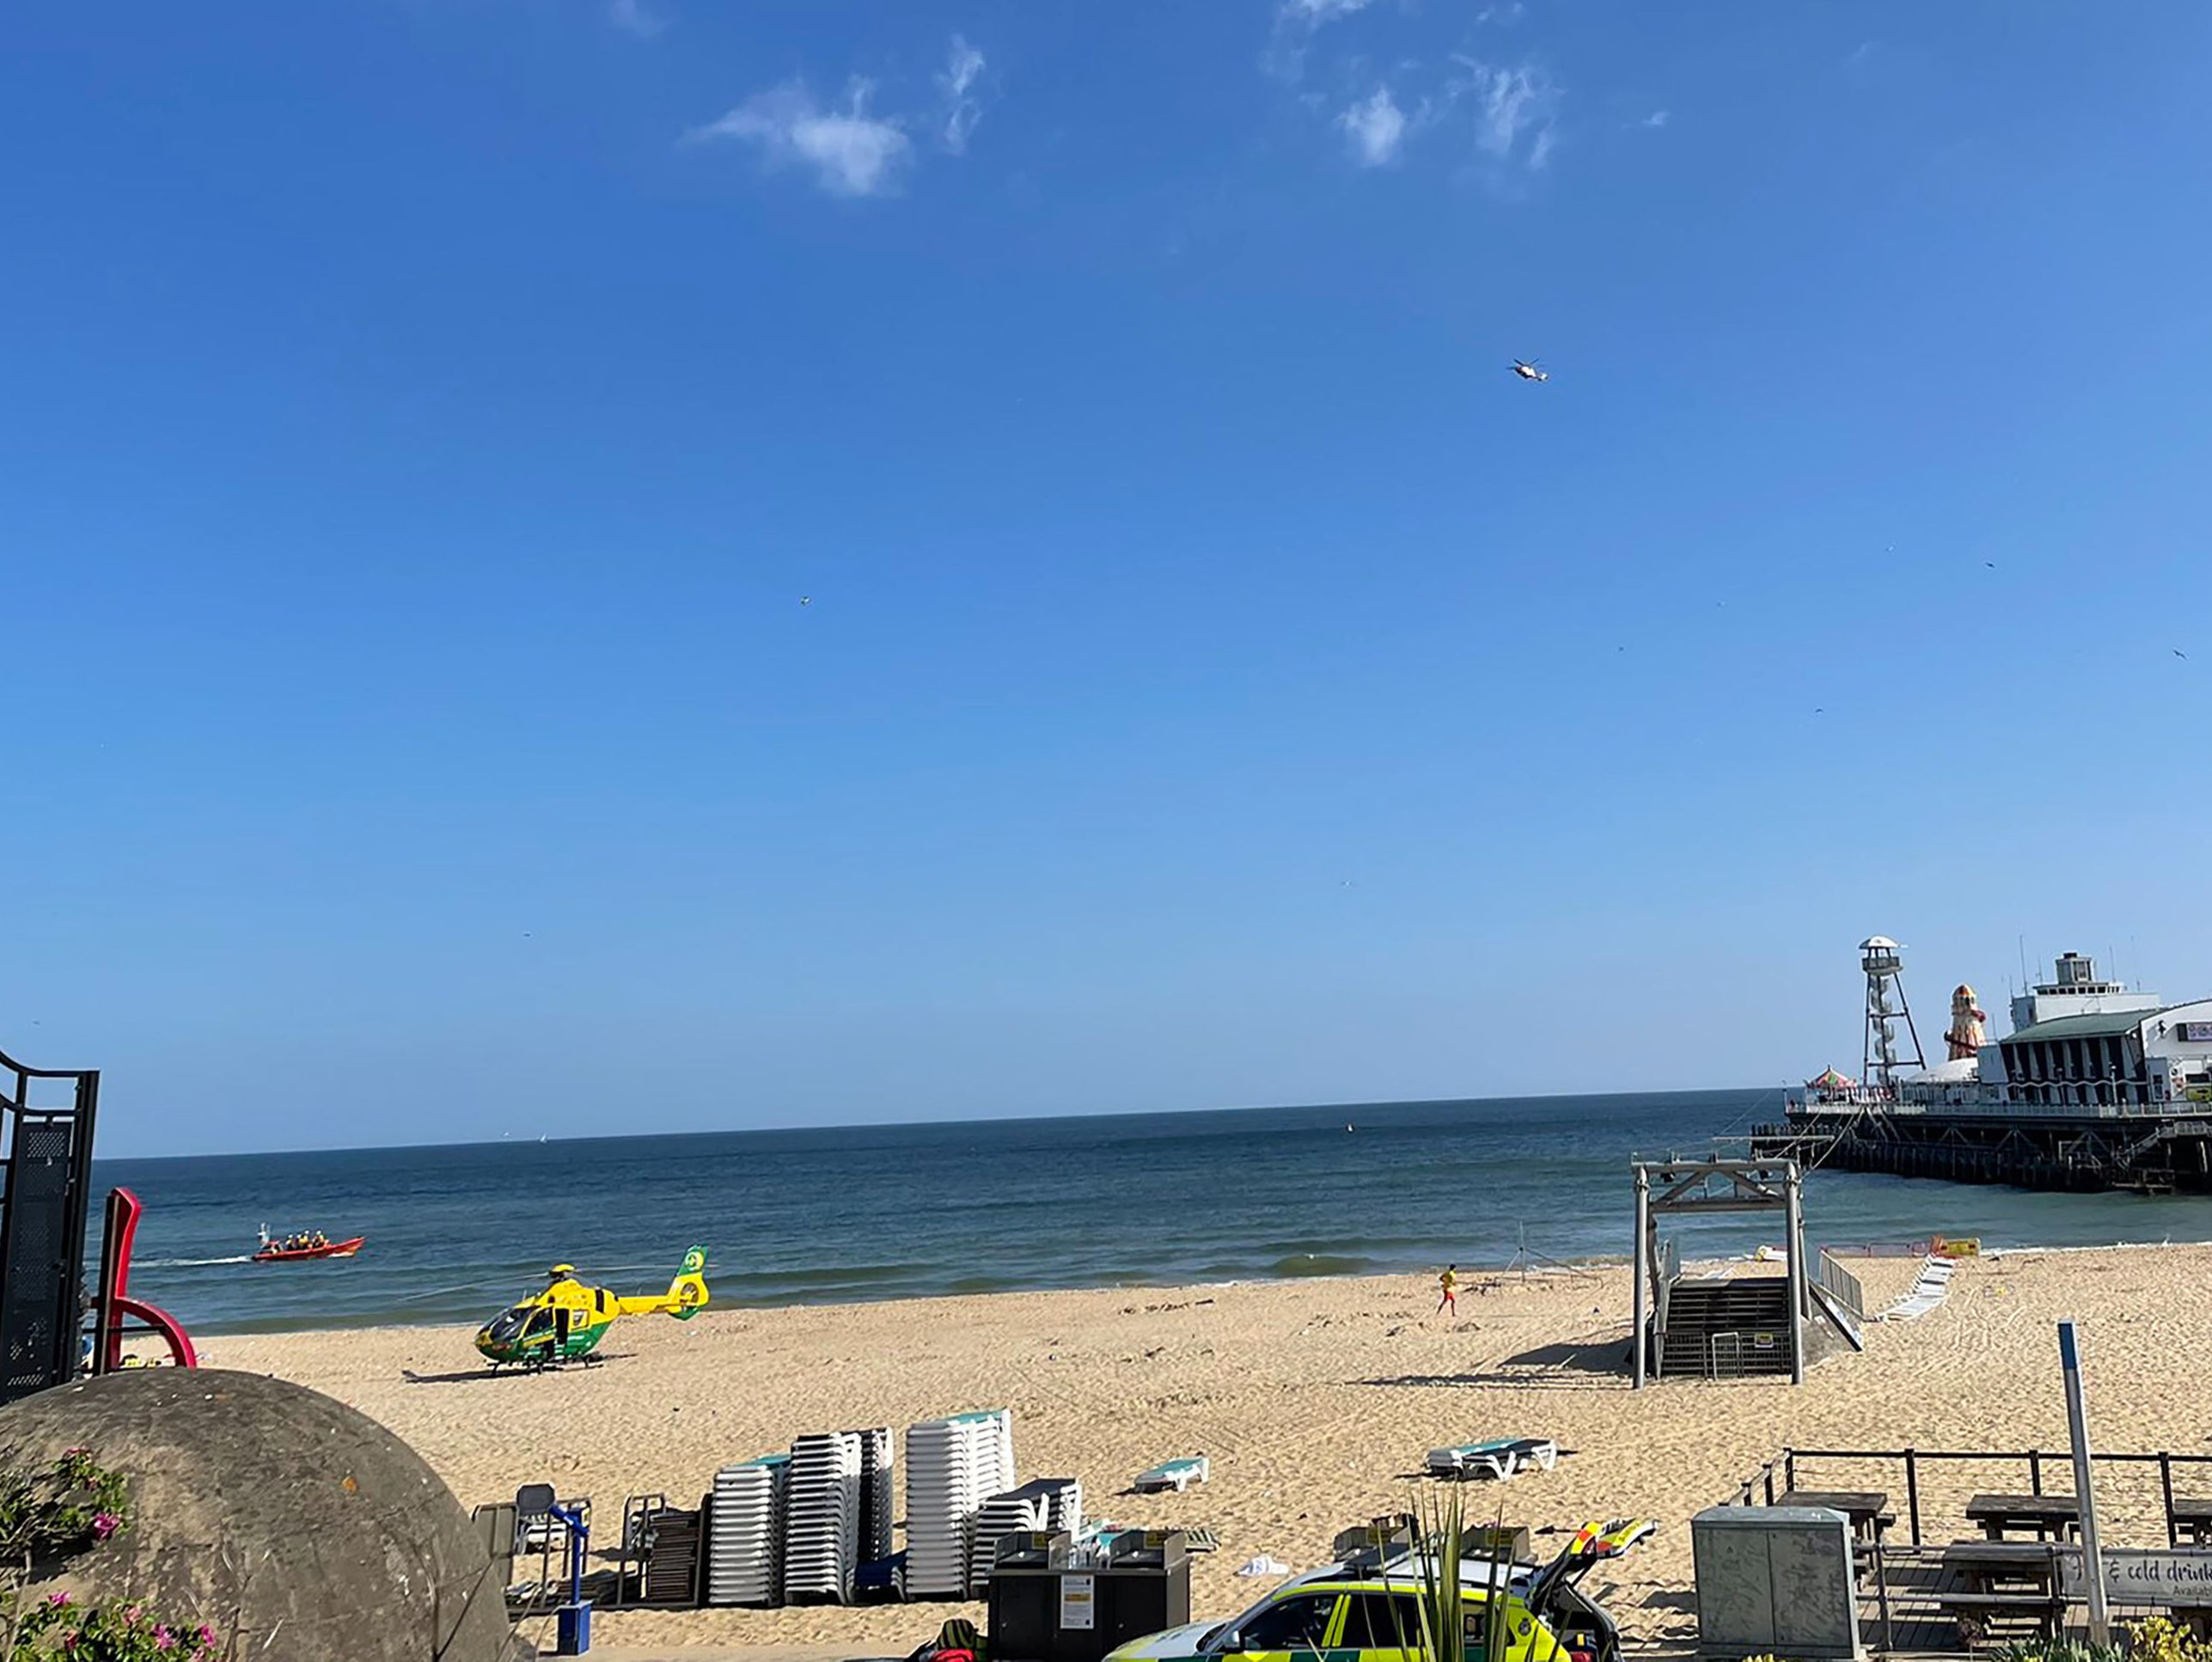 The beach was cleared to allow helicopters to land